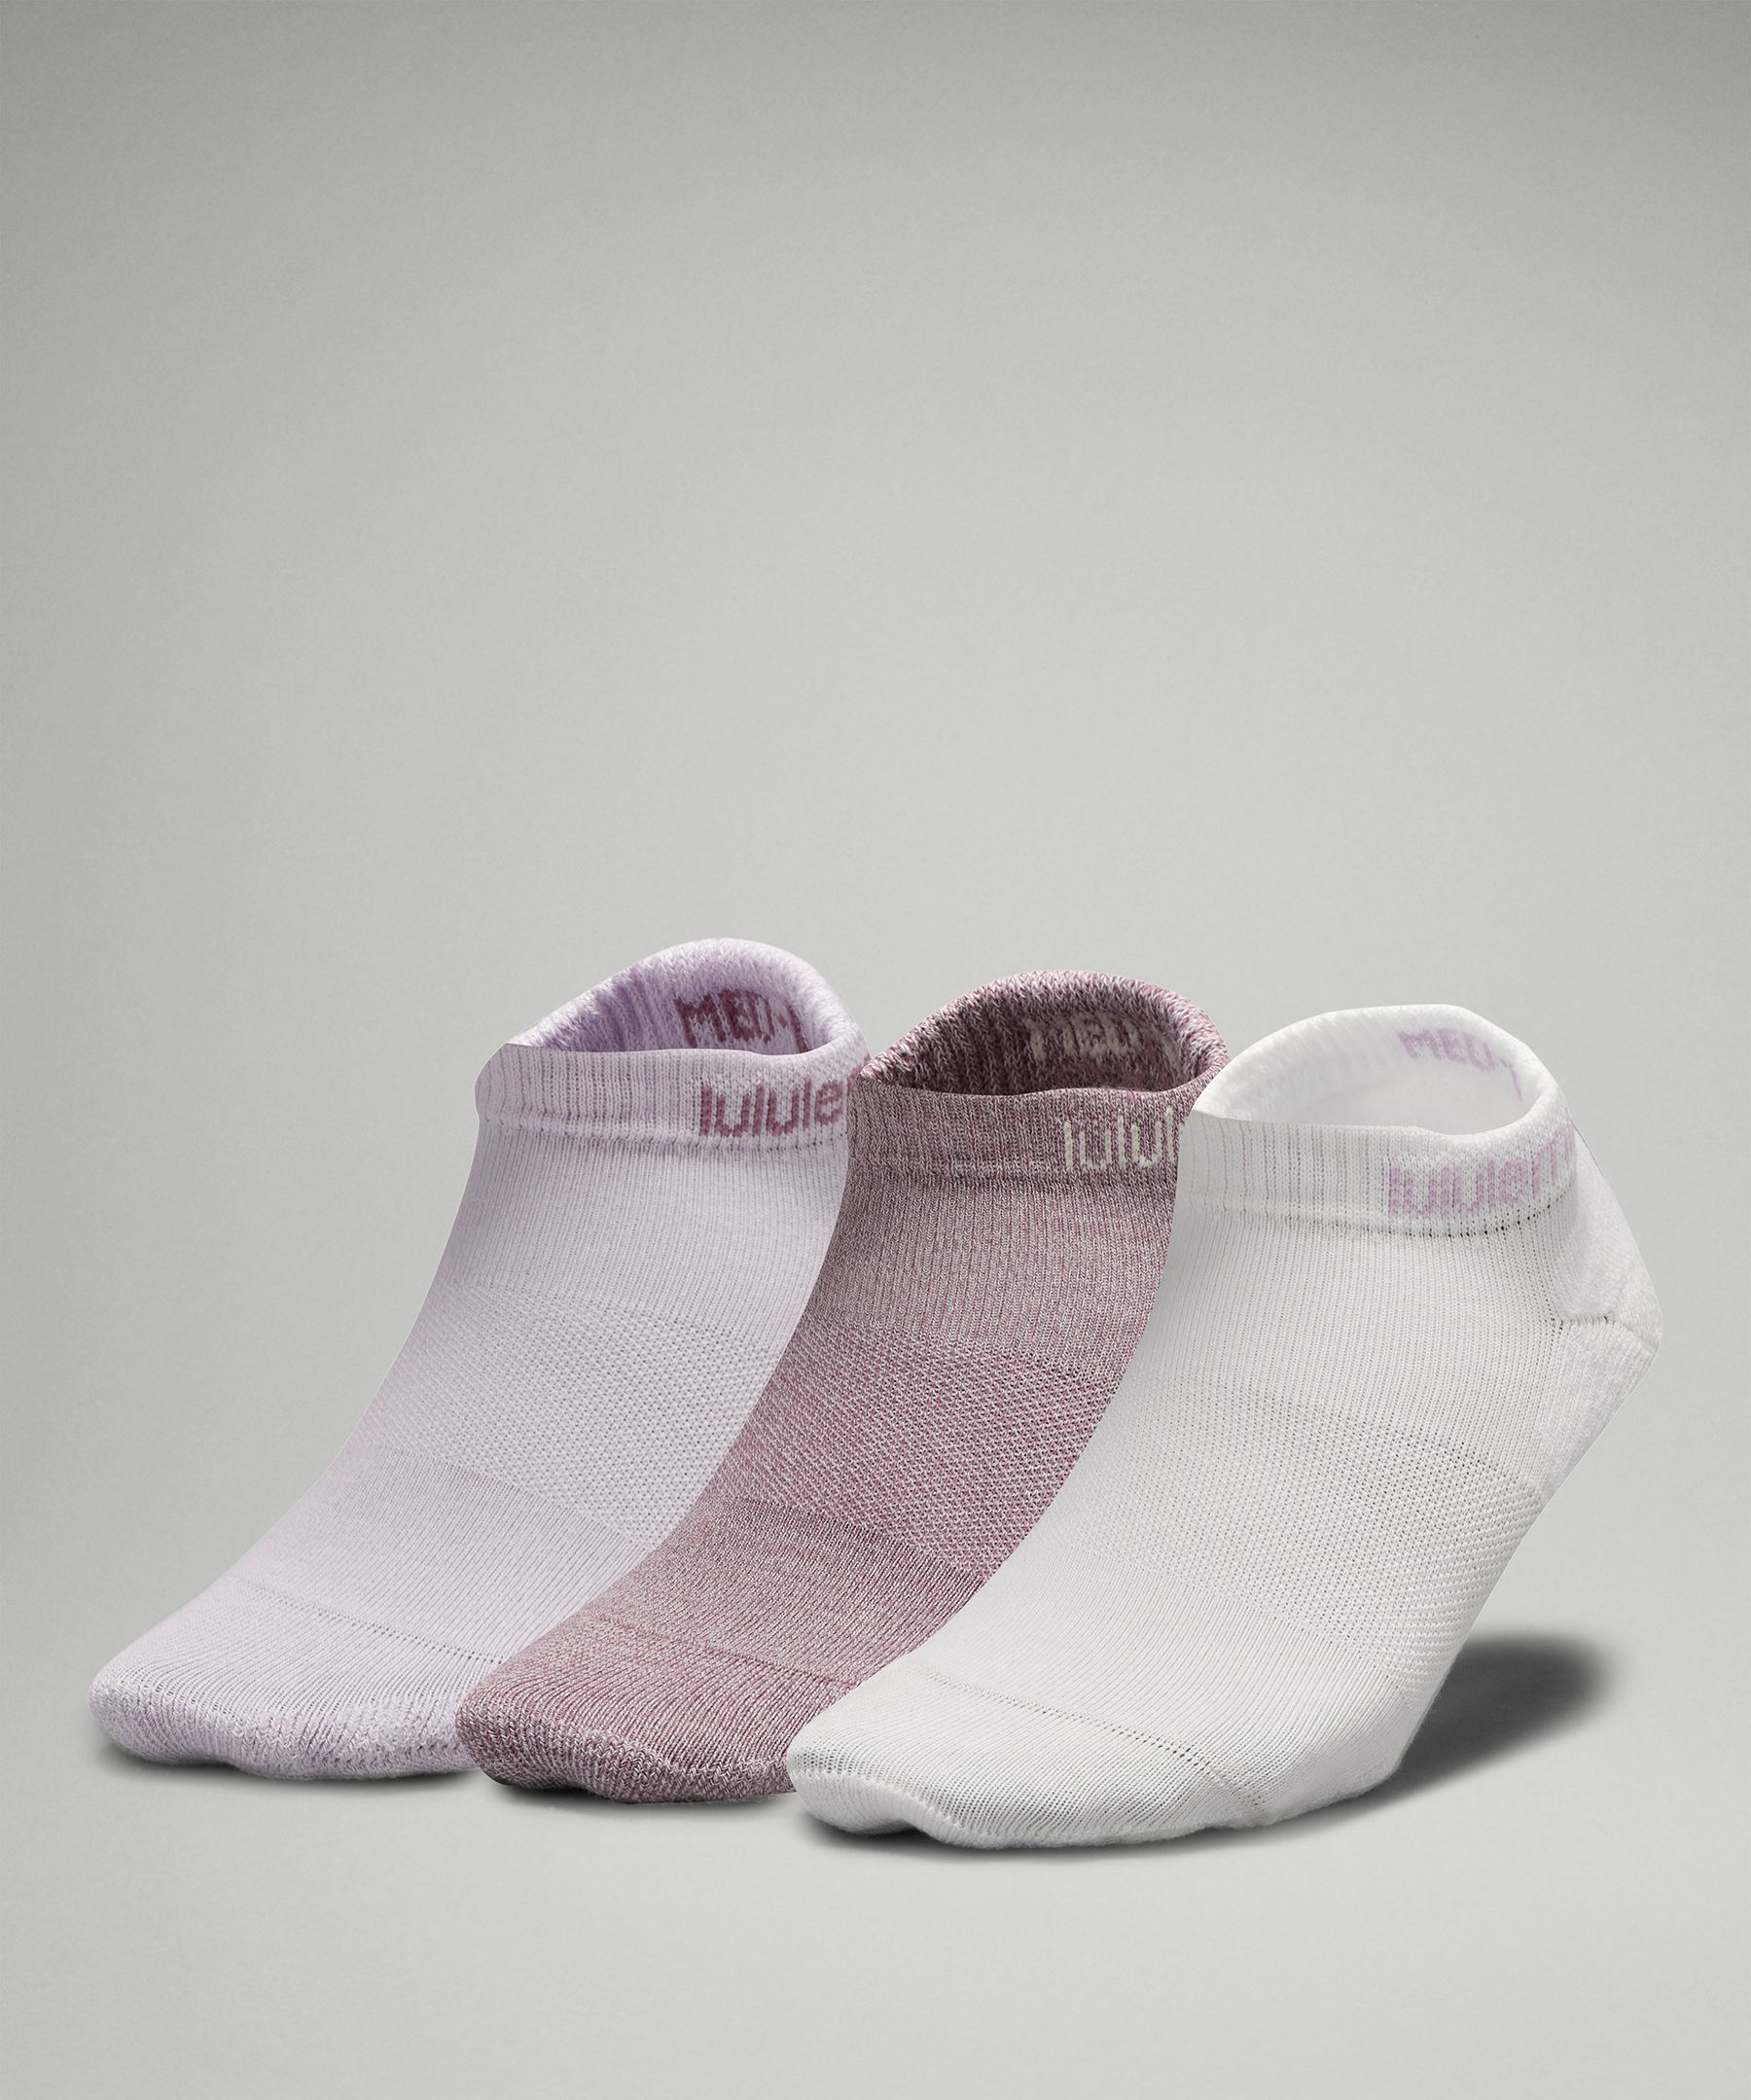 Womens Daily Stride Comfort Low-Ankle Socks *3 Pack